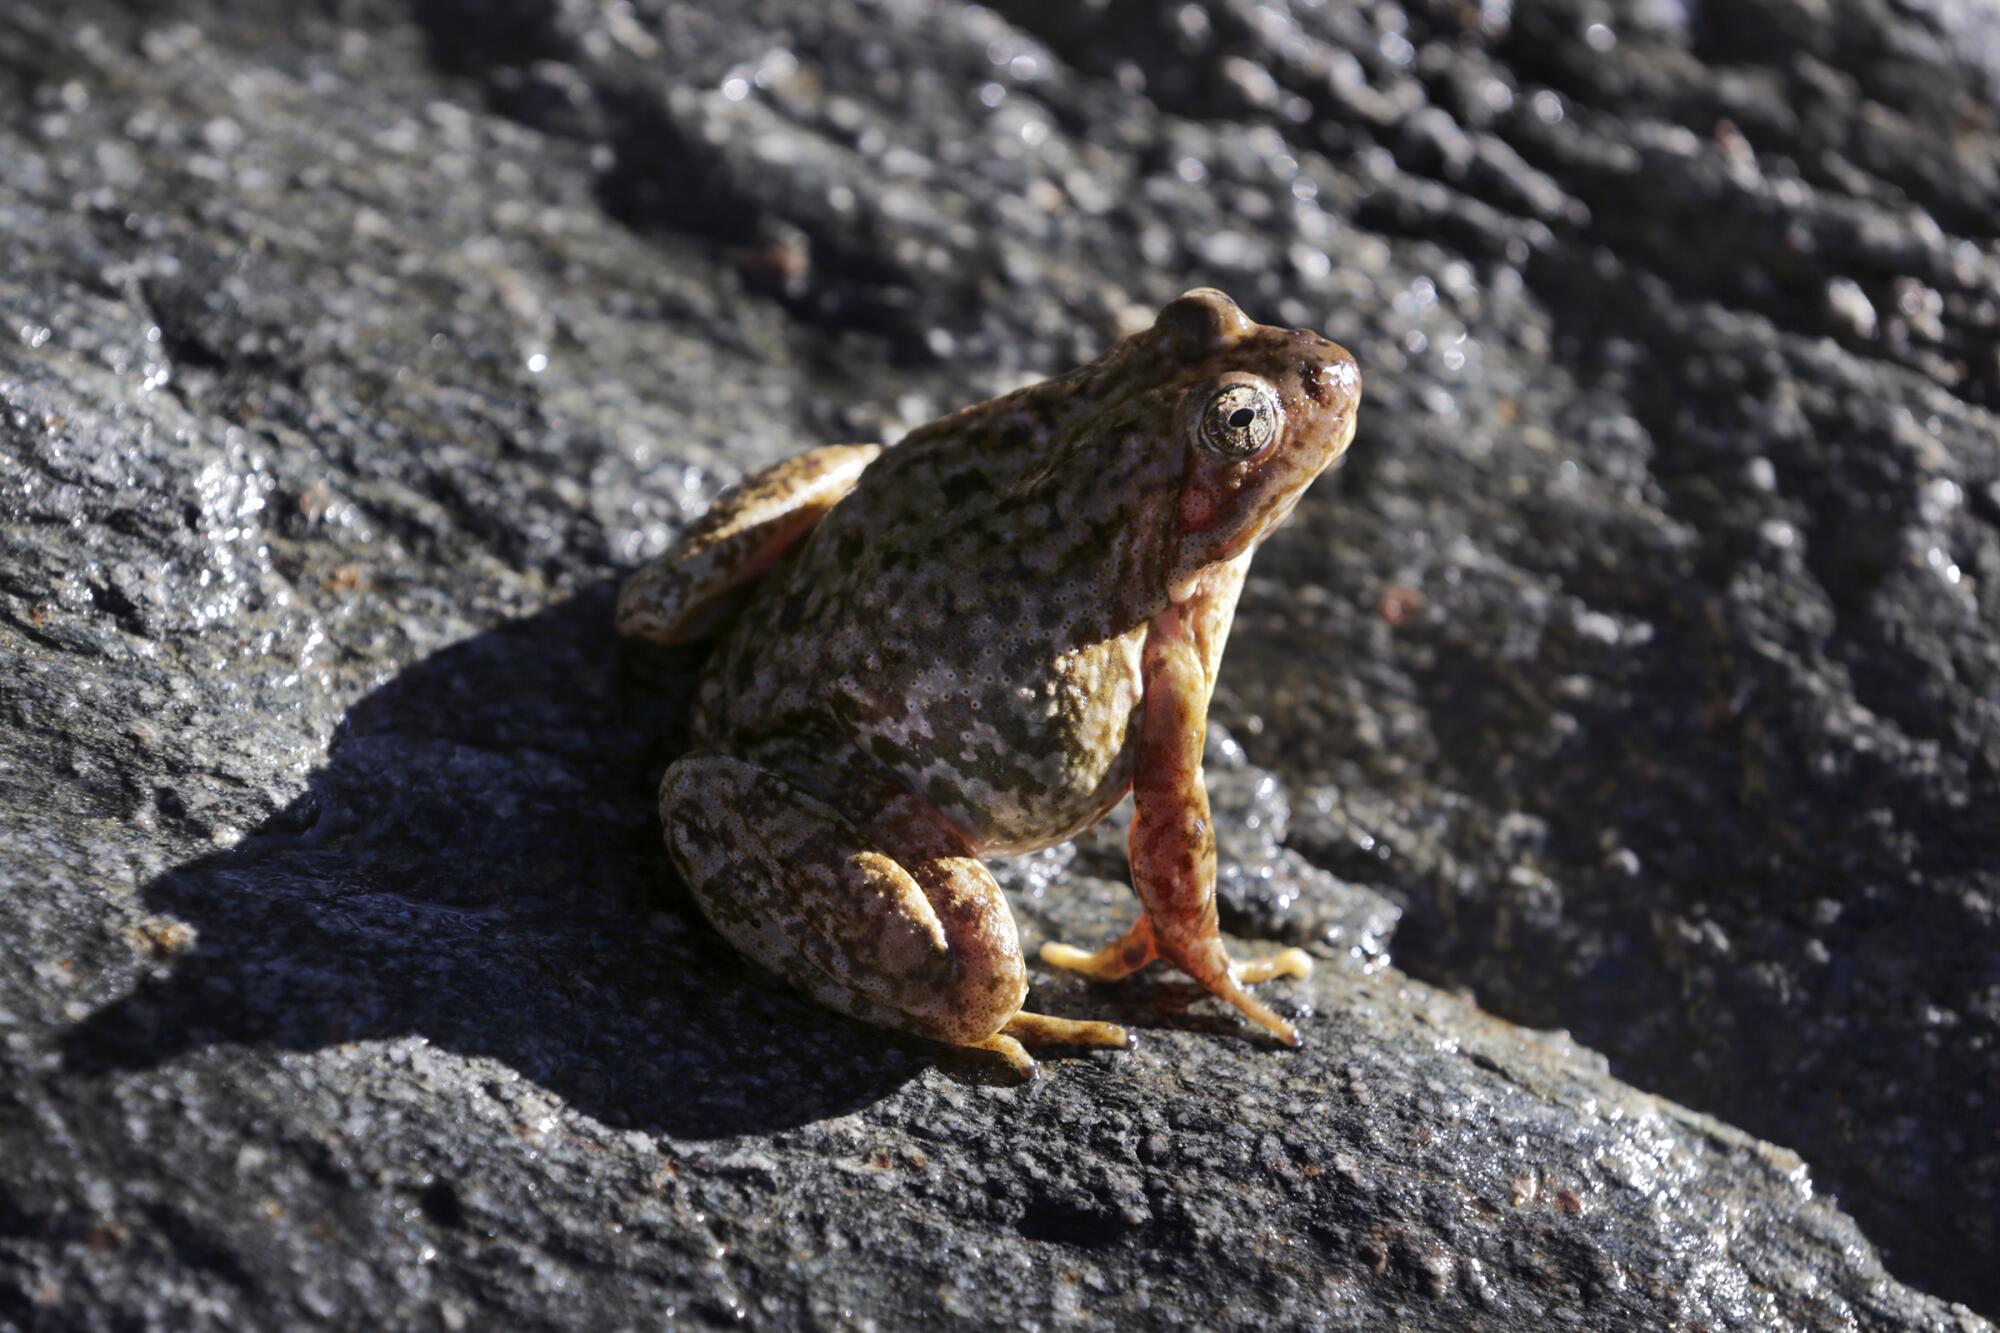 An endangered yellow-legged frog sighted near Wrightwood in the San Gabriel Mountains.